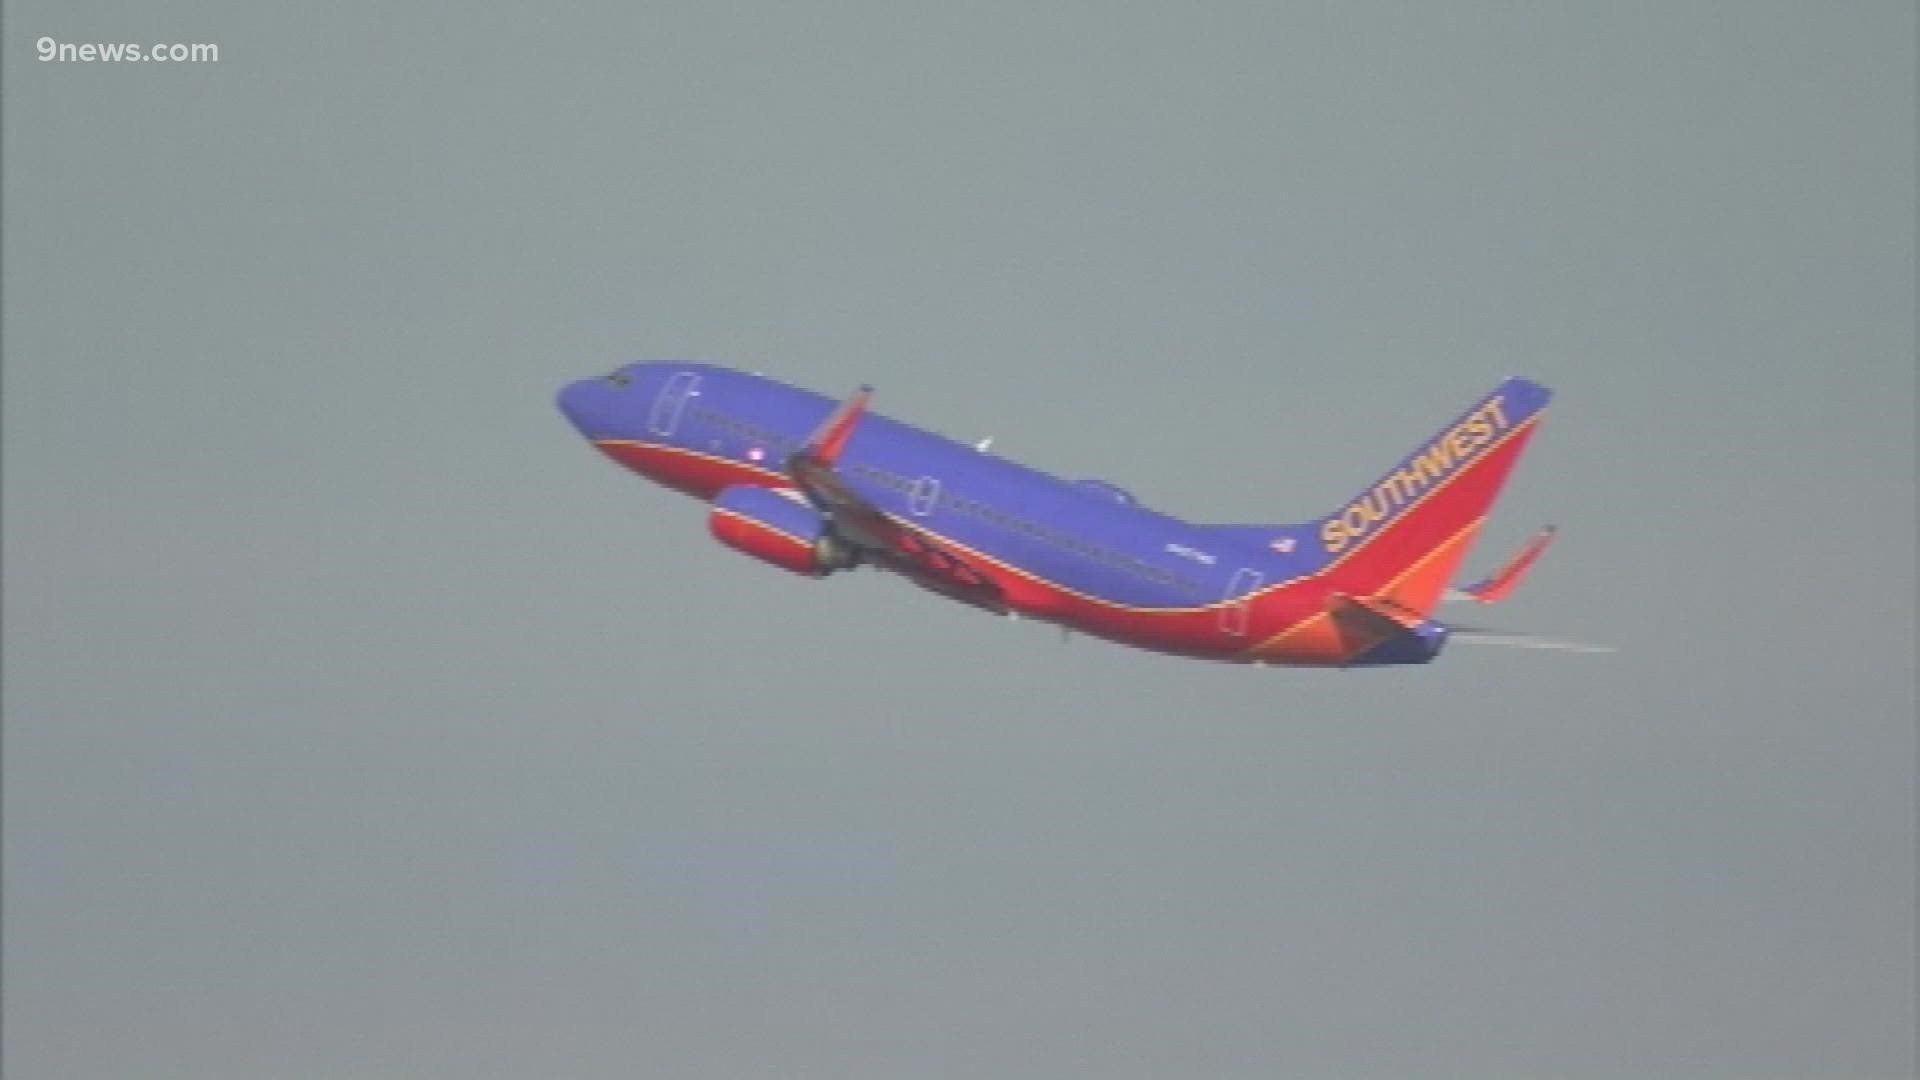 Southwest said the issue is now resolved, and it plans to update customers whose flights are still delayed.